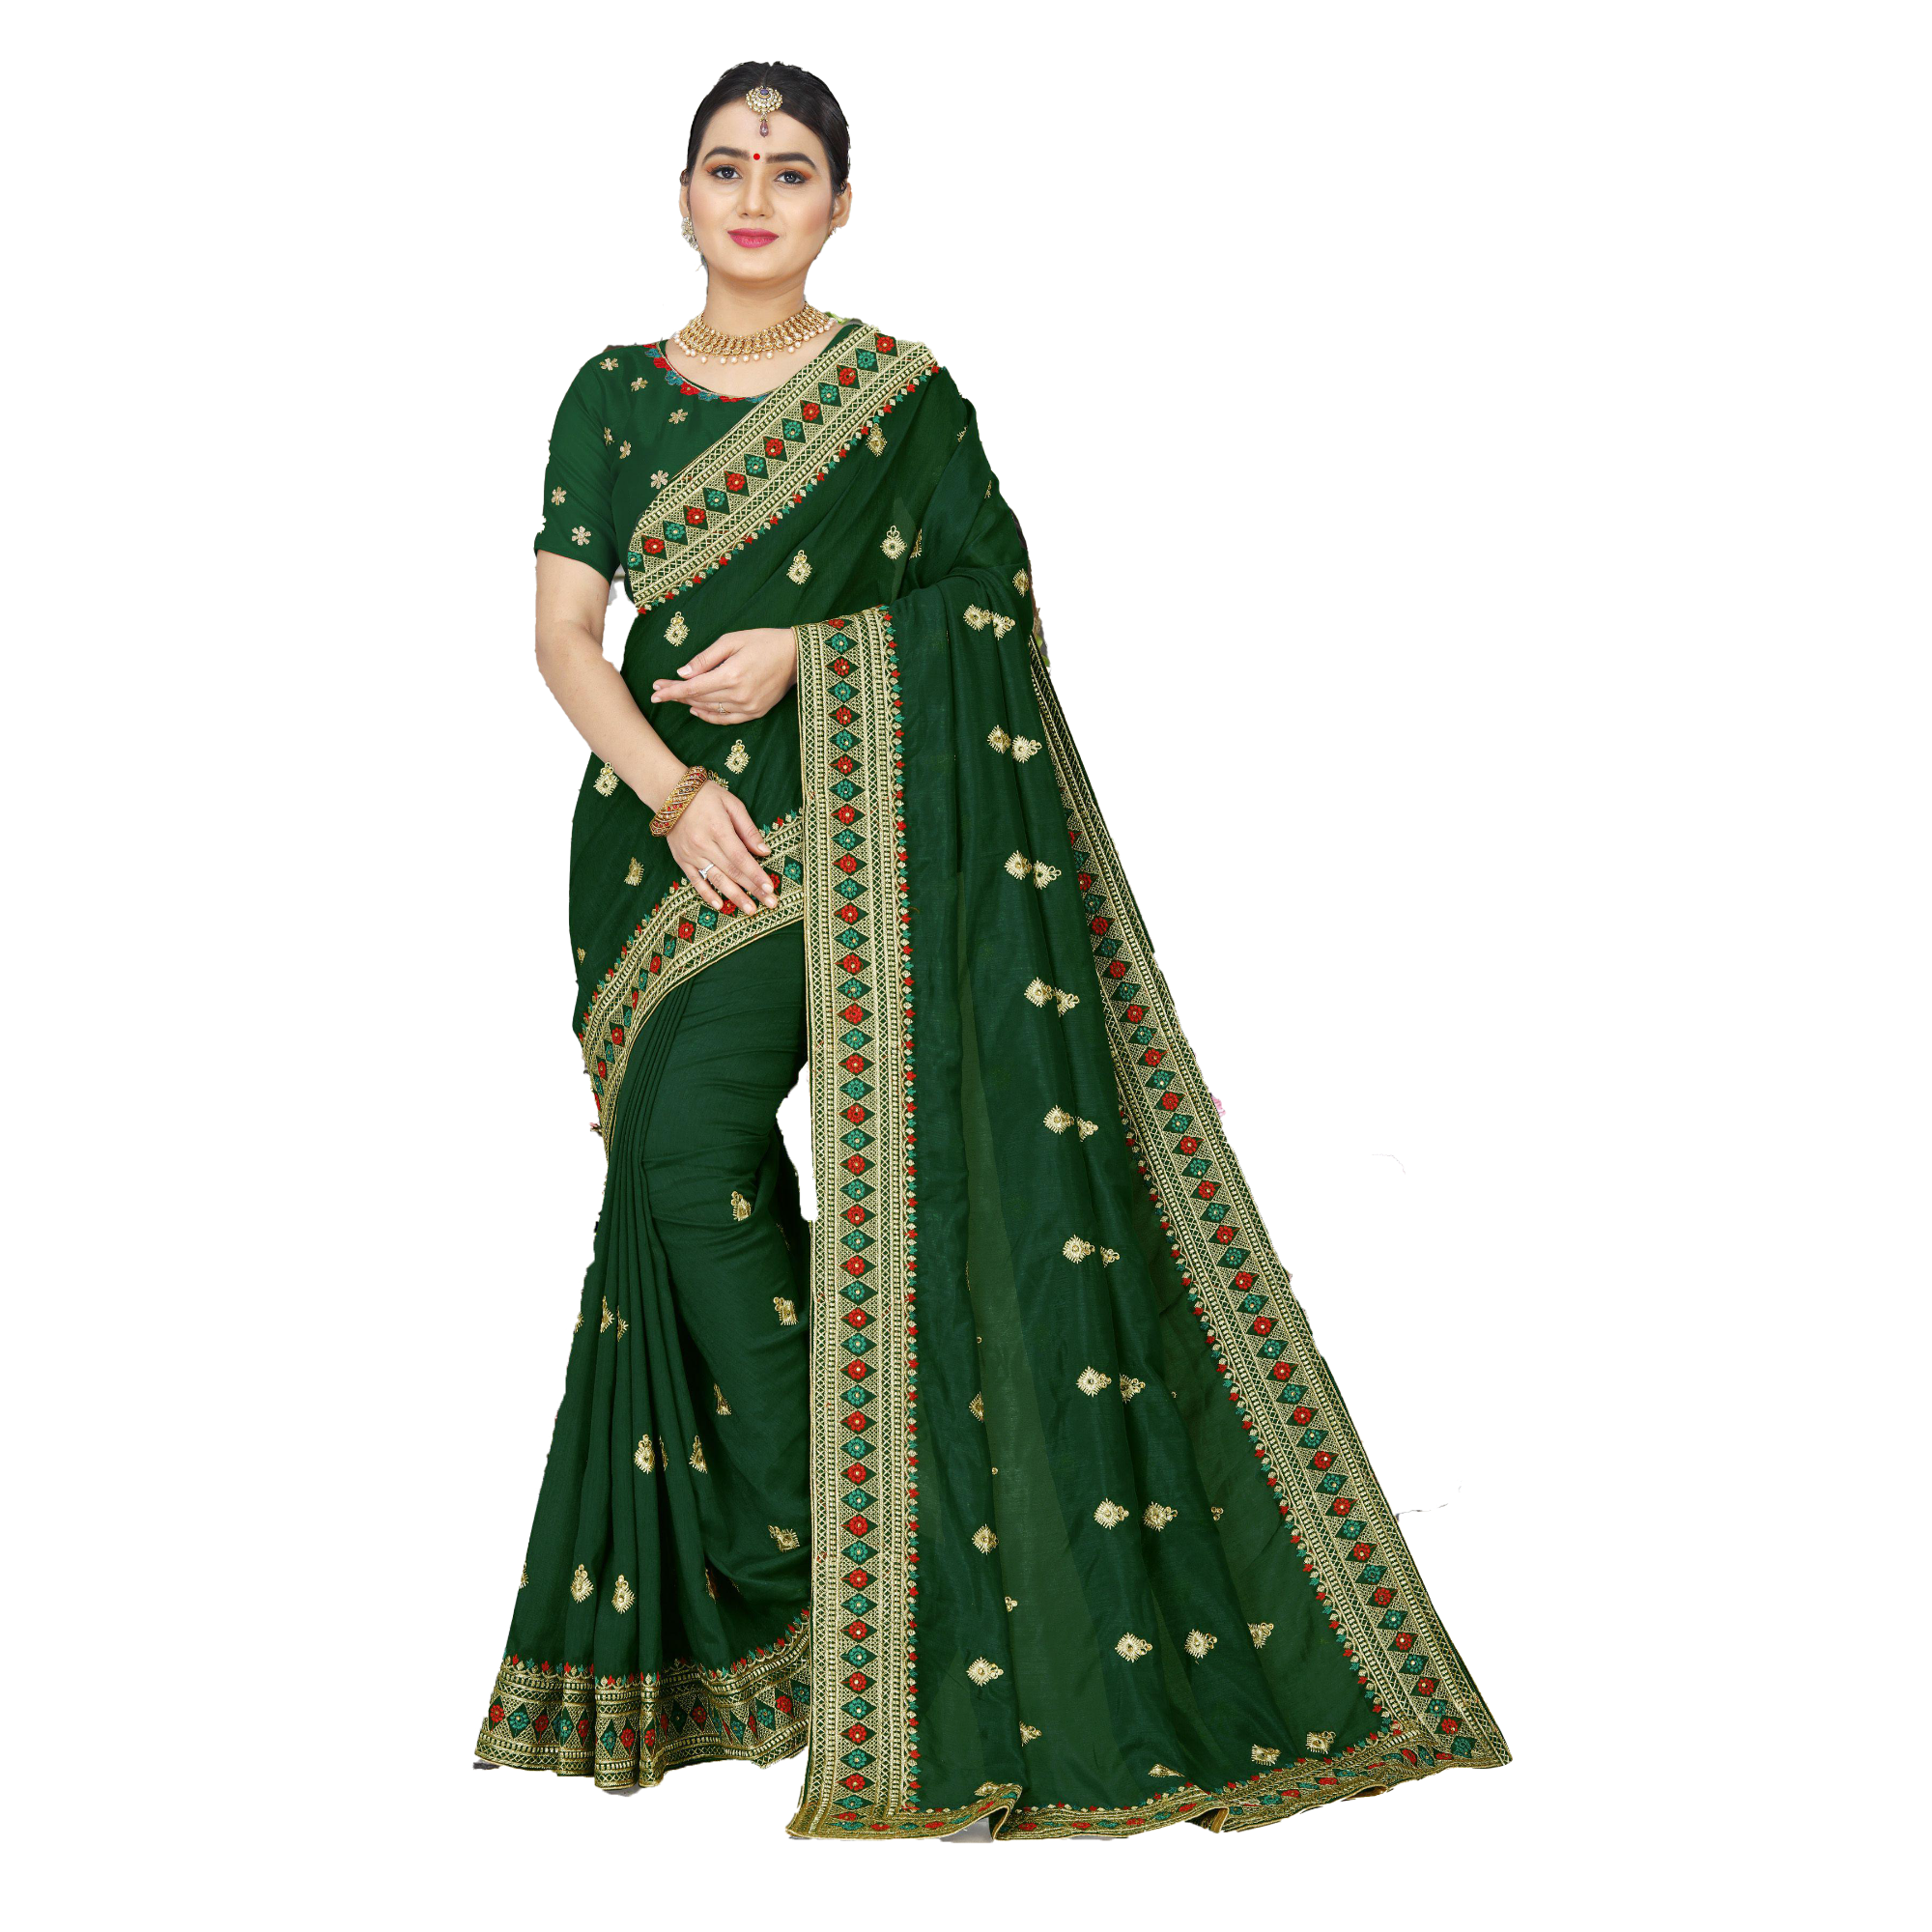 Women's Simple Embroidered Design Saree with Blouse Piece - TheHangr